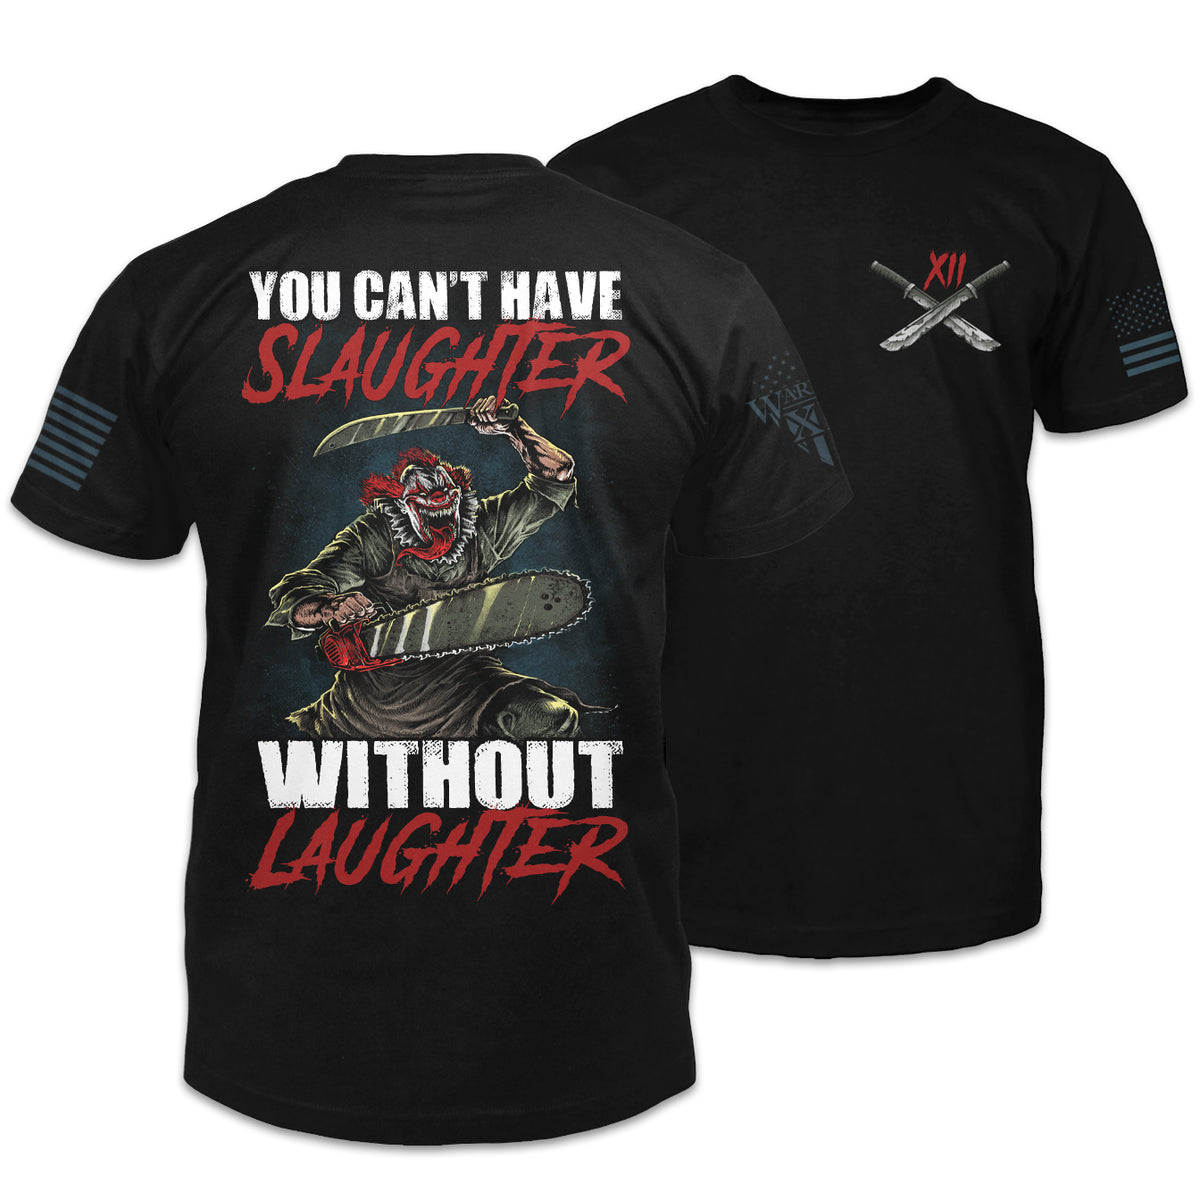 Front and back black t-shirt with the words "You can't have slaughter without laughter" with a clown holding a machete and chain saw printed on the shirt.